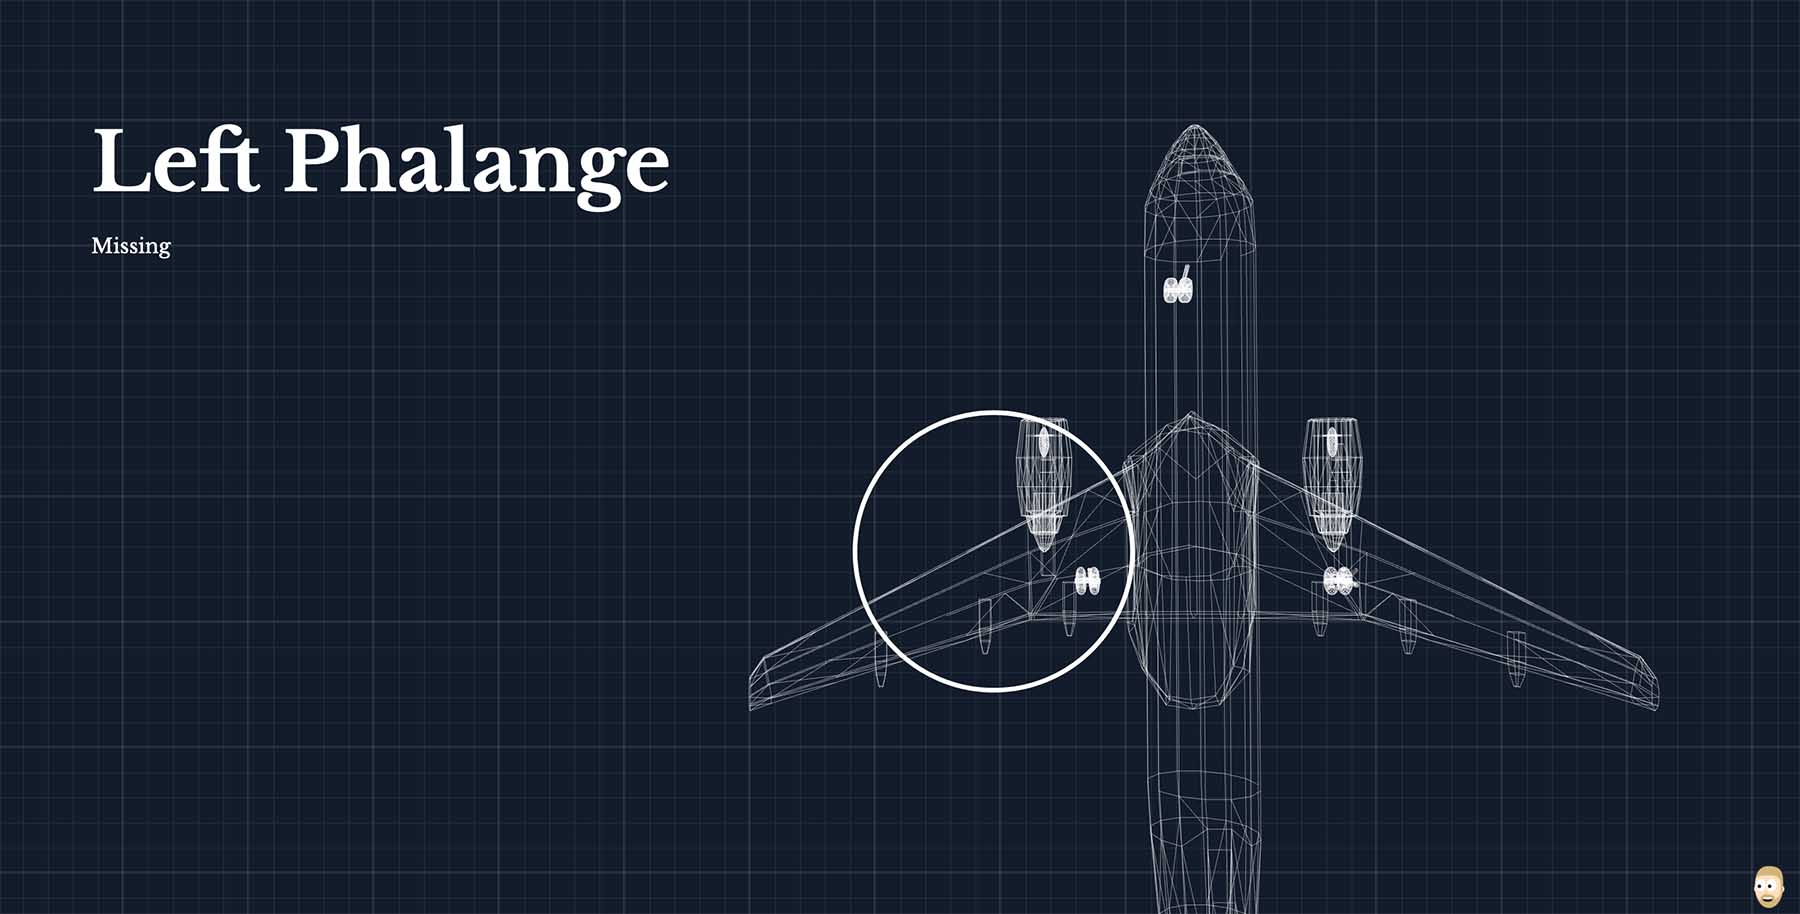 Screenshot of Codepen demo with aeroplane wireframe in foreground